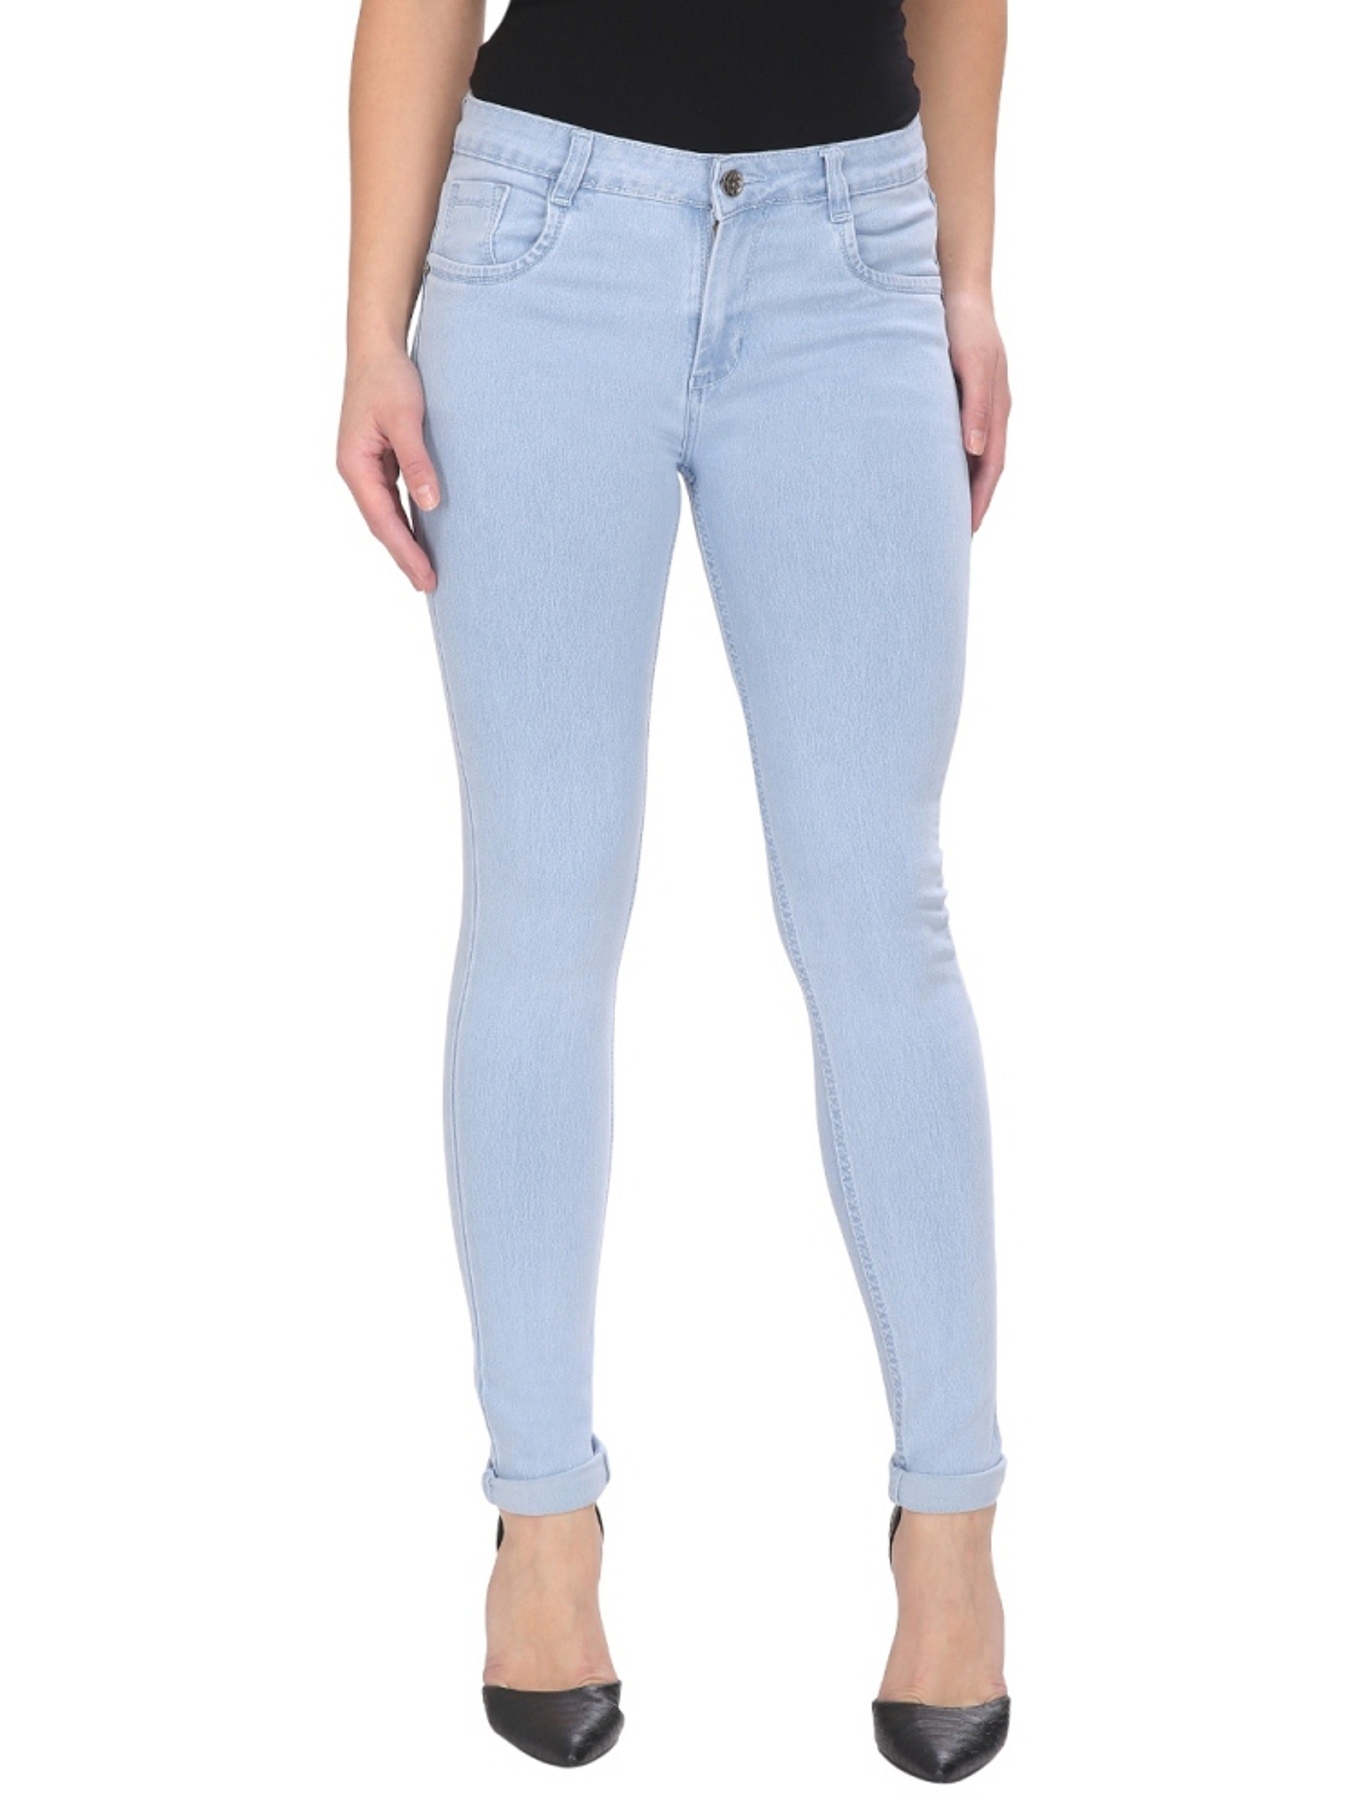 Buy BAT Light Blue Solid Jeans for women Online @ ₹740 from ShopClues